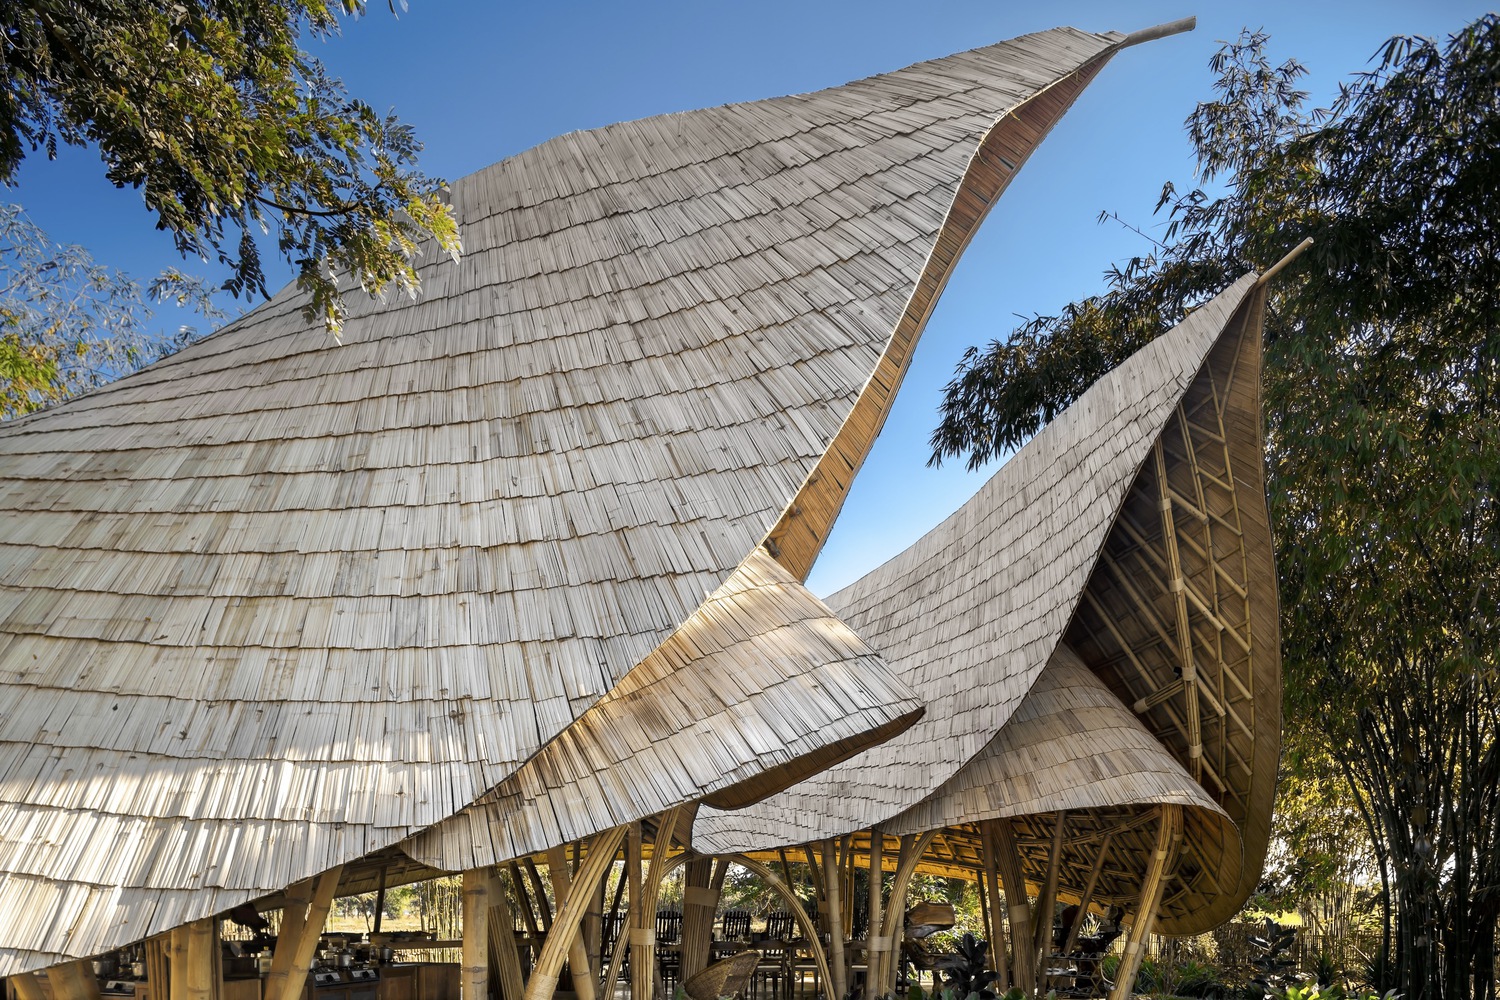 Close-up of the upturned roofs. Photo from Chiangmai Life Architects.